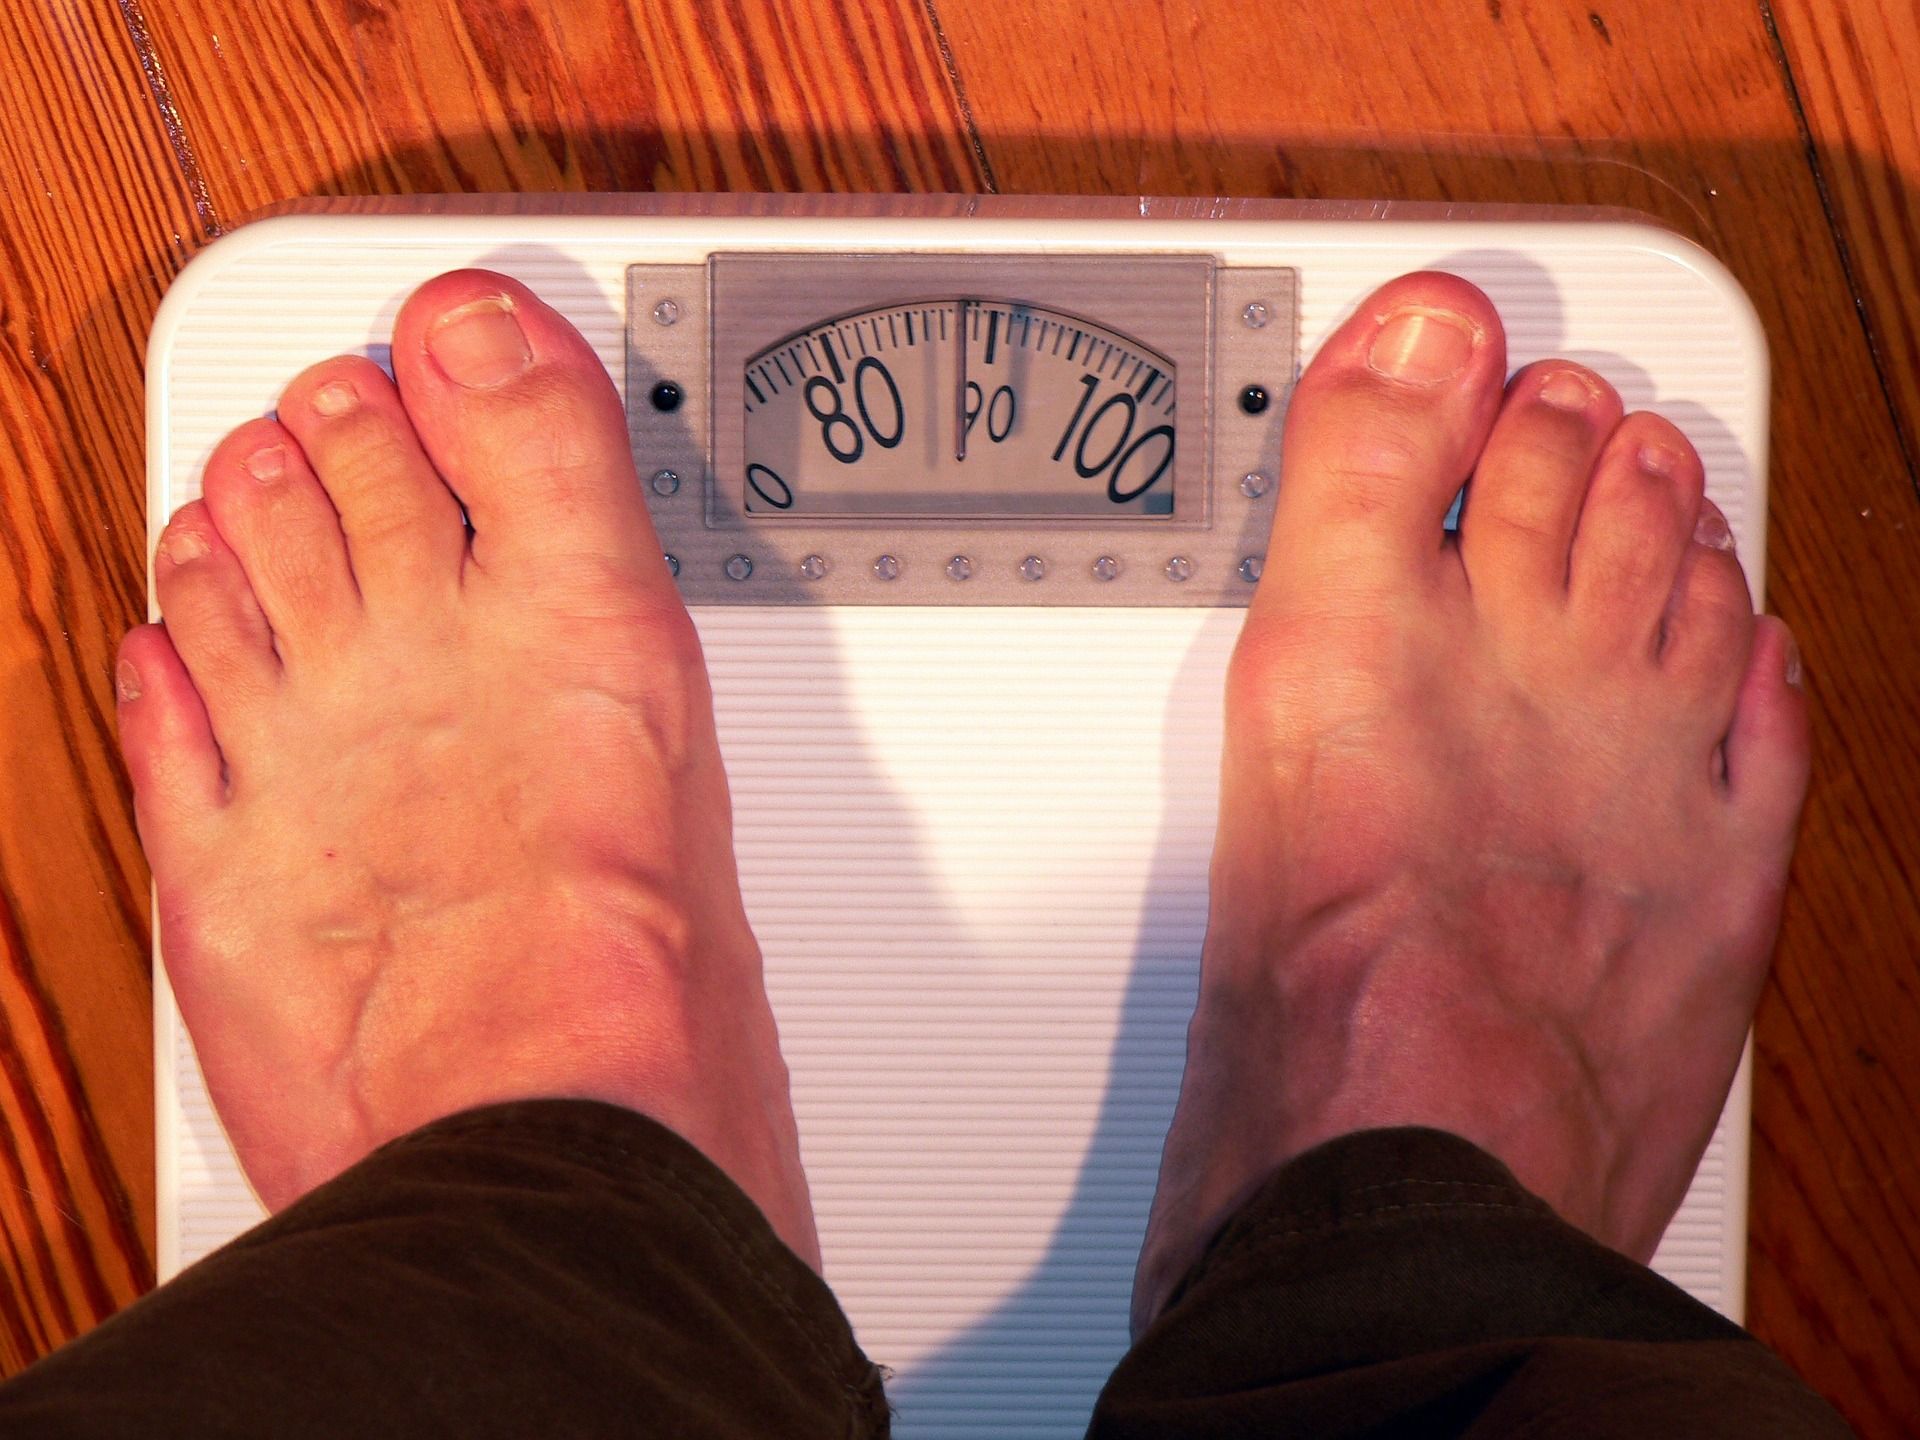 A Better Measure of Metabolic Health: What Is Your Biological BMI?